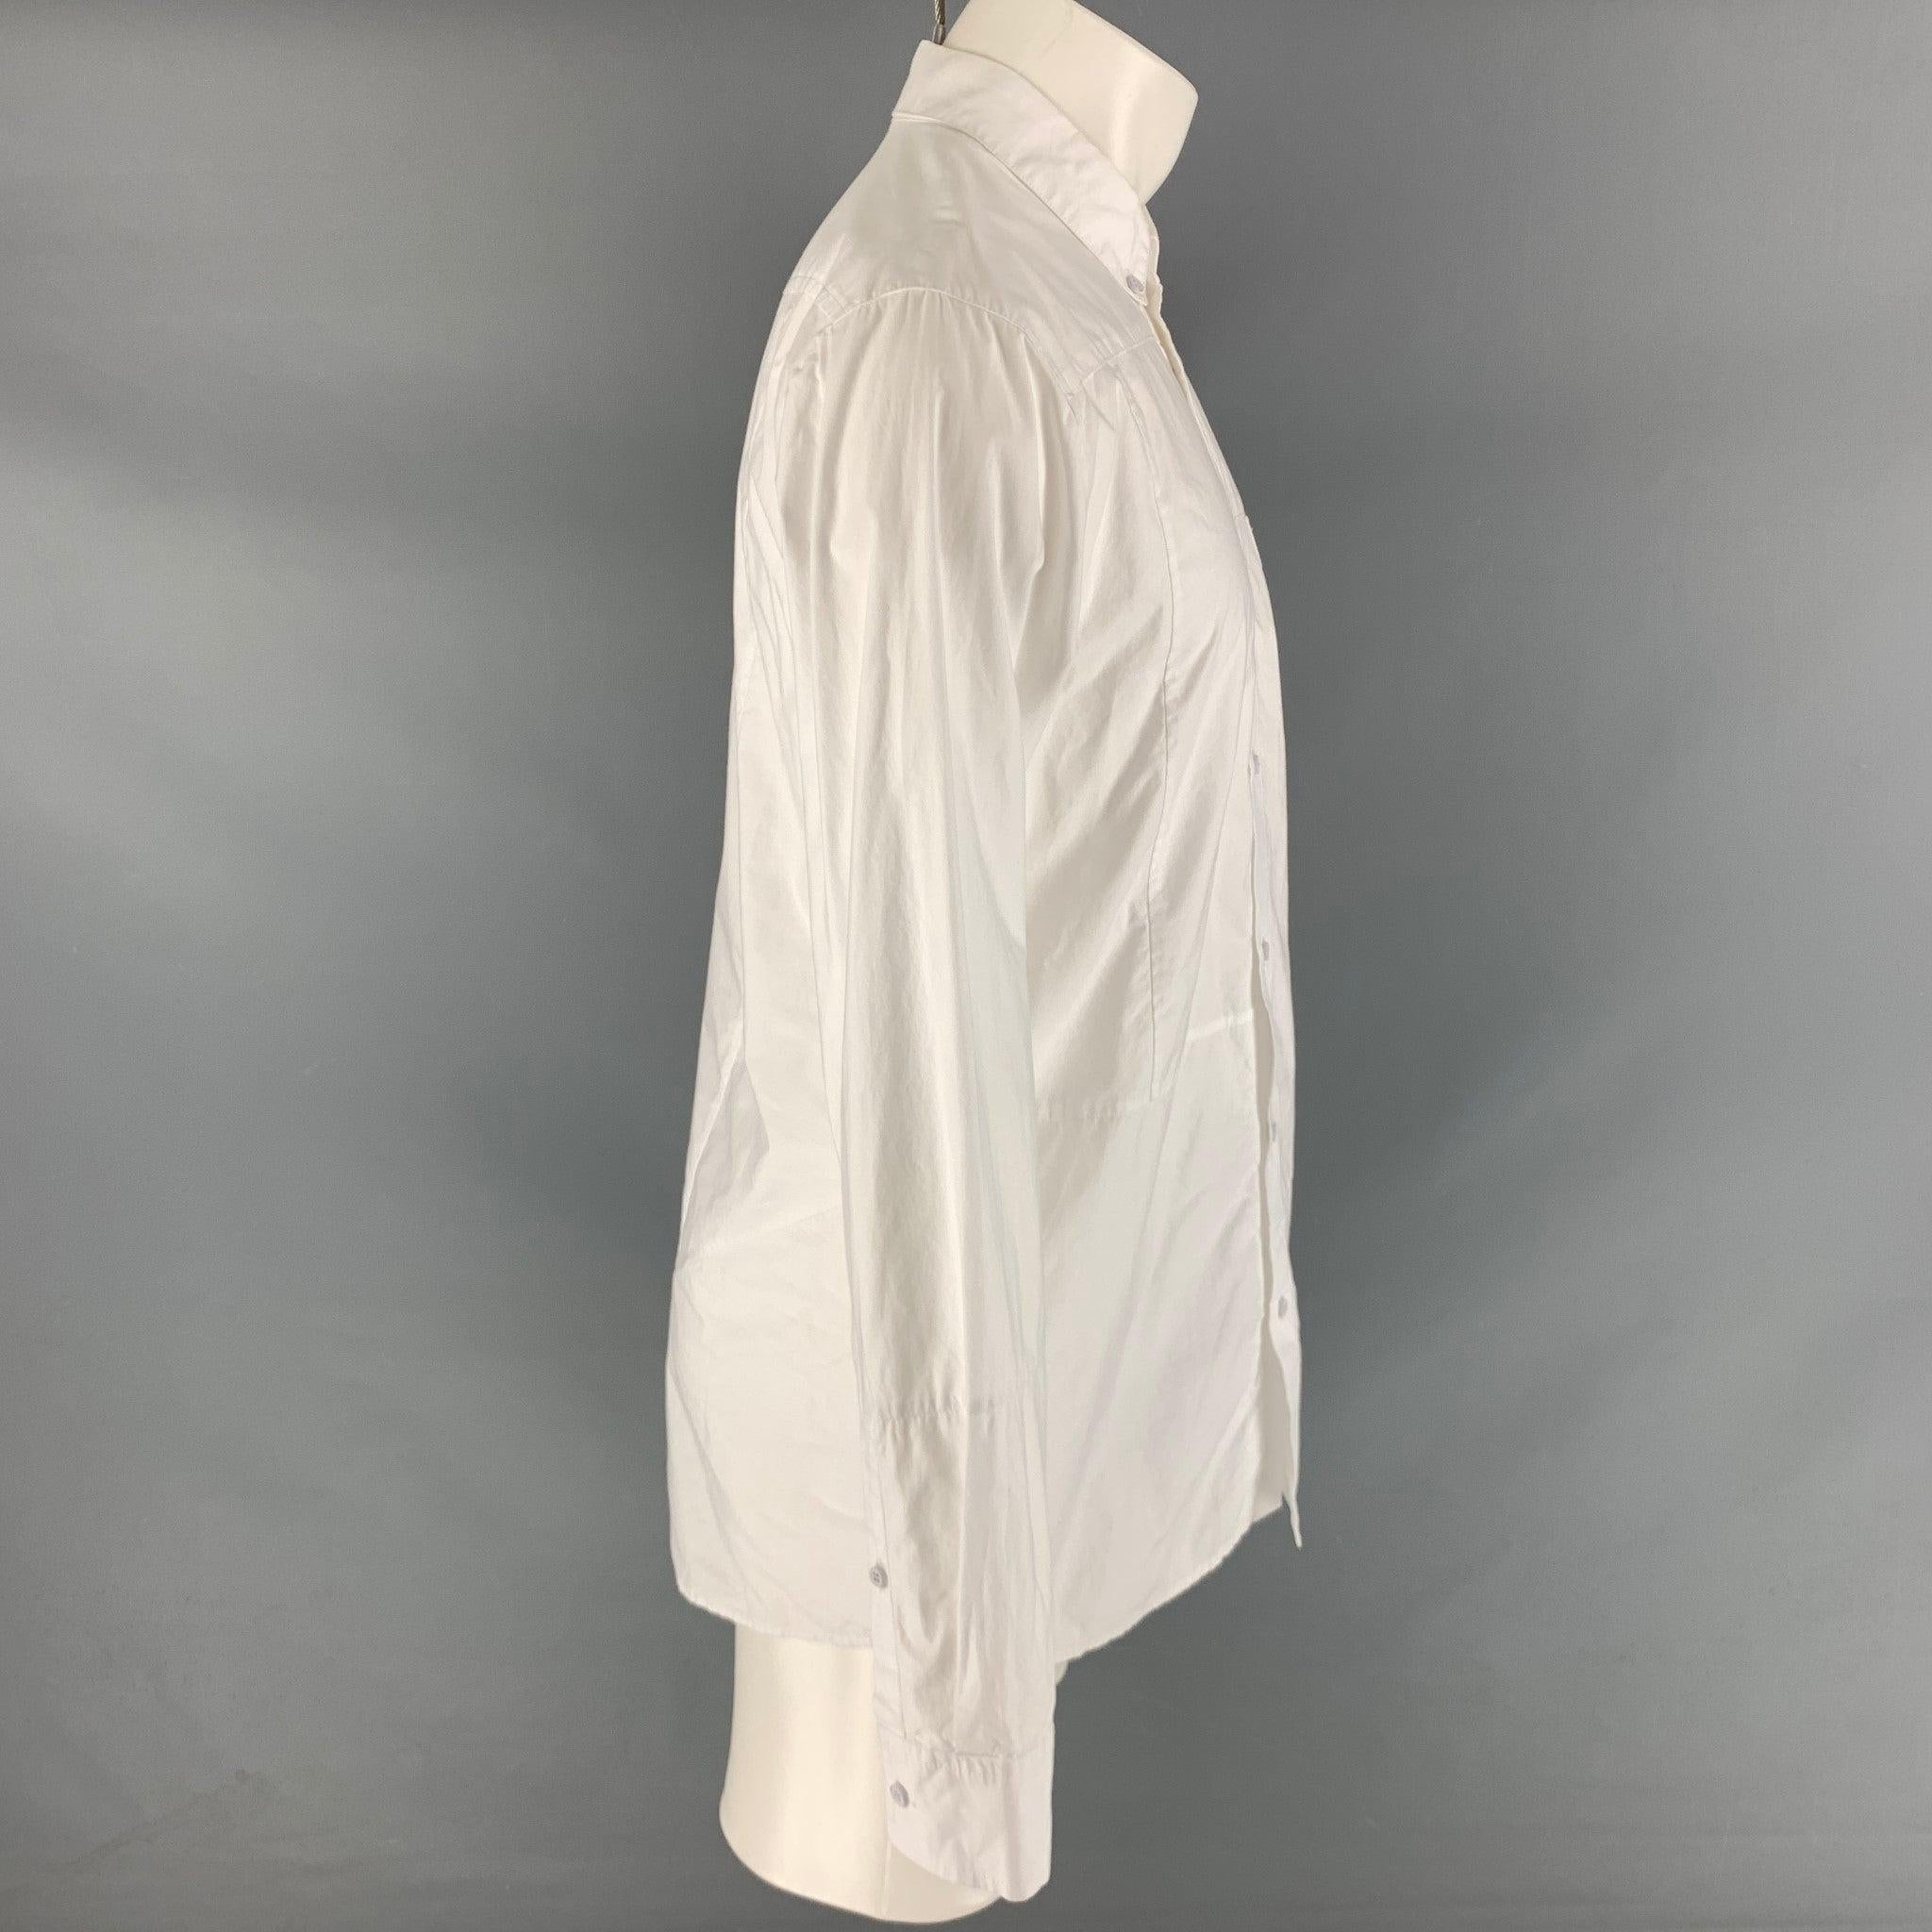 ALEXANDER WANG long sleeve shirt comes in a white cotton featuring a straight collar, asymmetric seams, and a white button closure.Excellent Pre-Owned Condition. 

Marked:   S
 

Measurements: 
 
Shoulder: 19 inches Chest: 42 inches Sleeve: 25.5